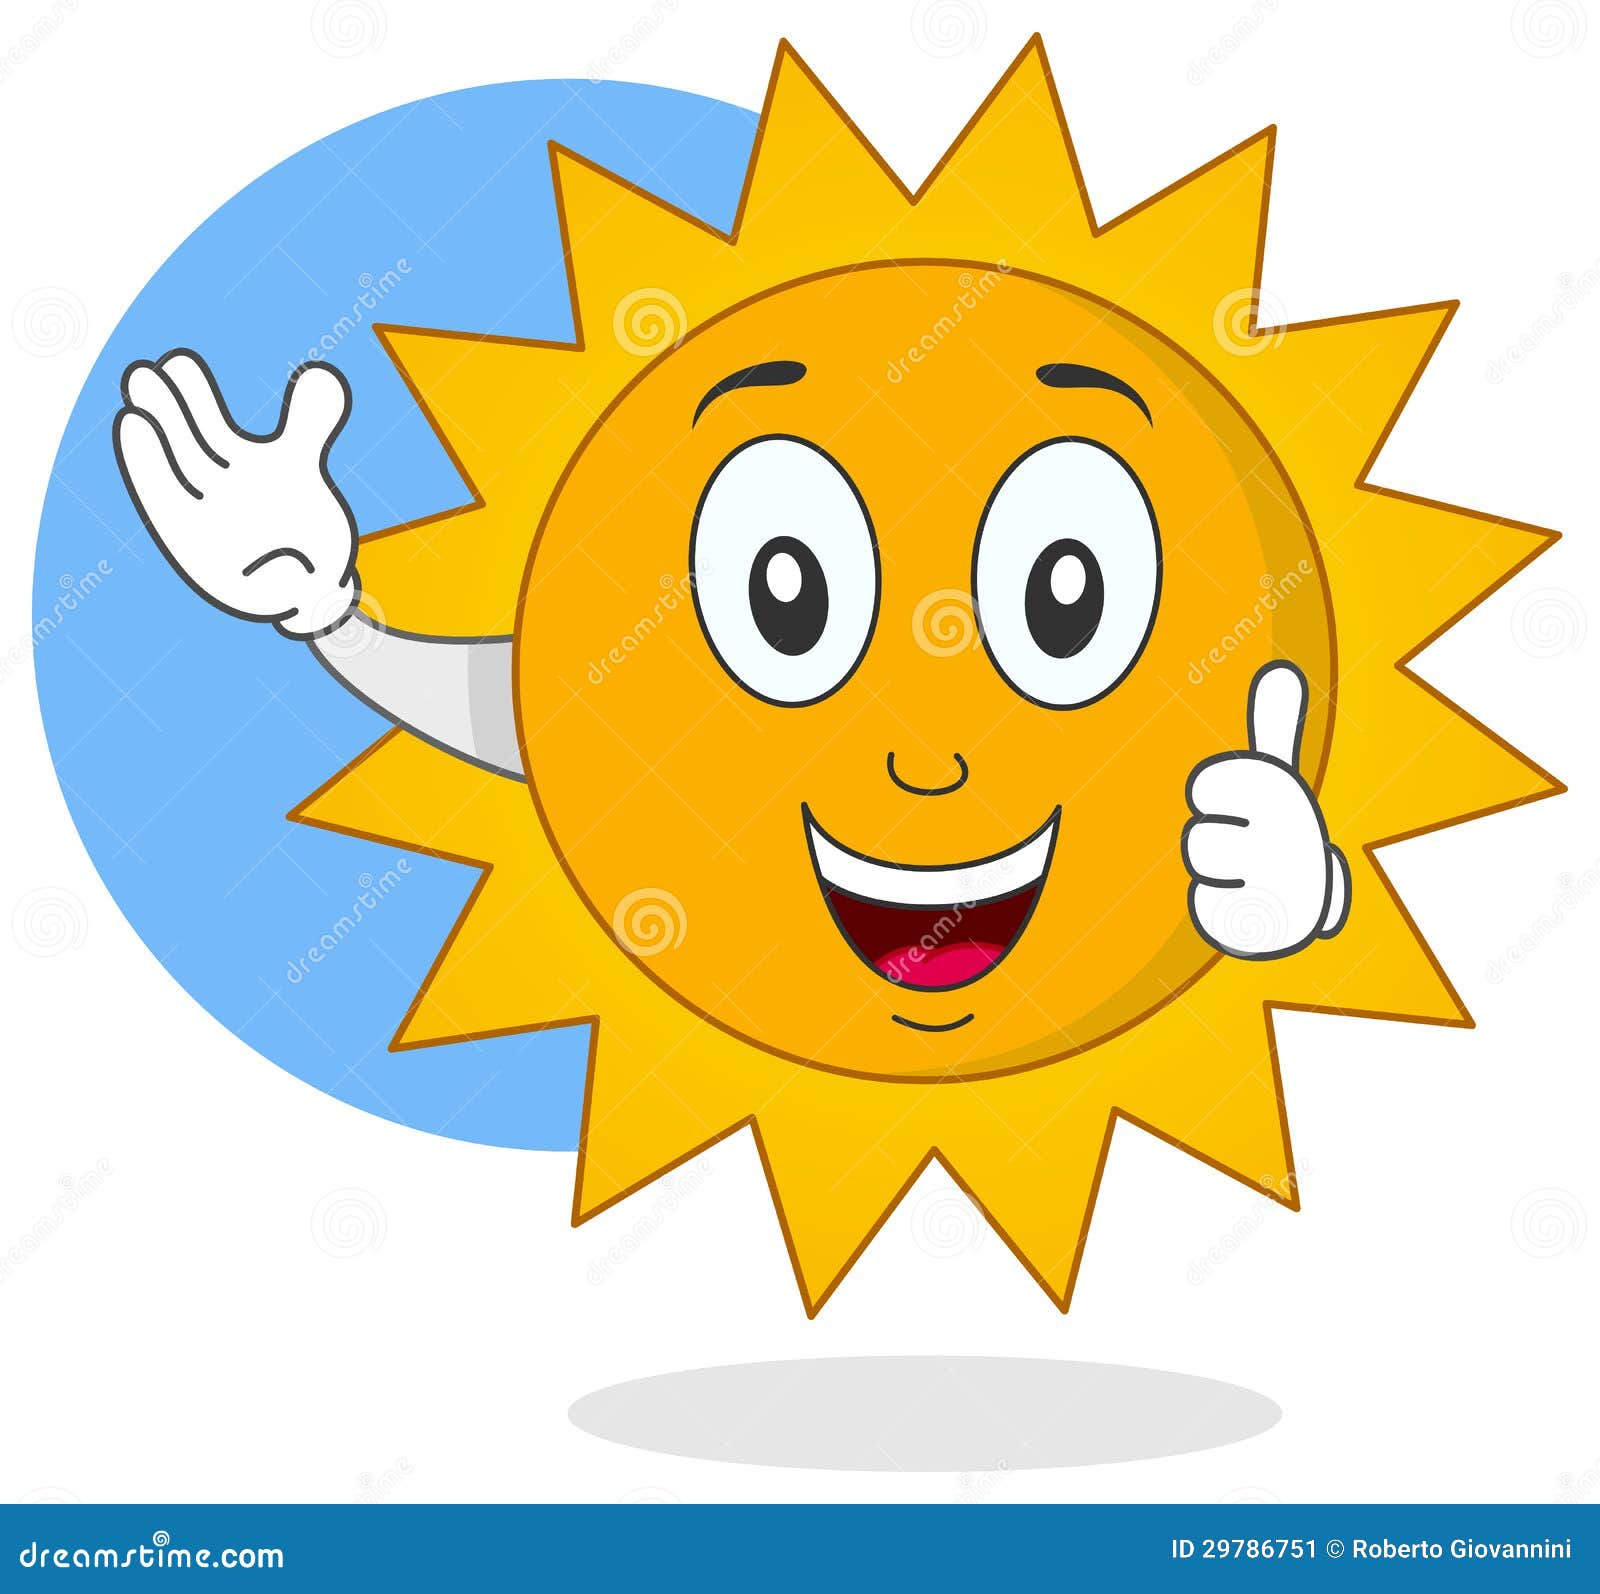 animated summer clipart - photo #49